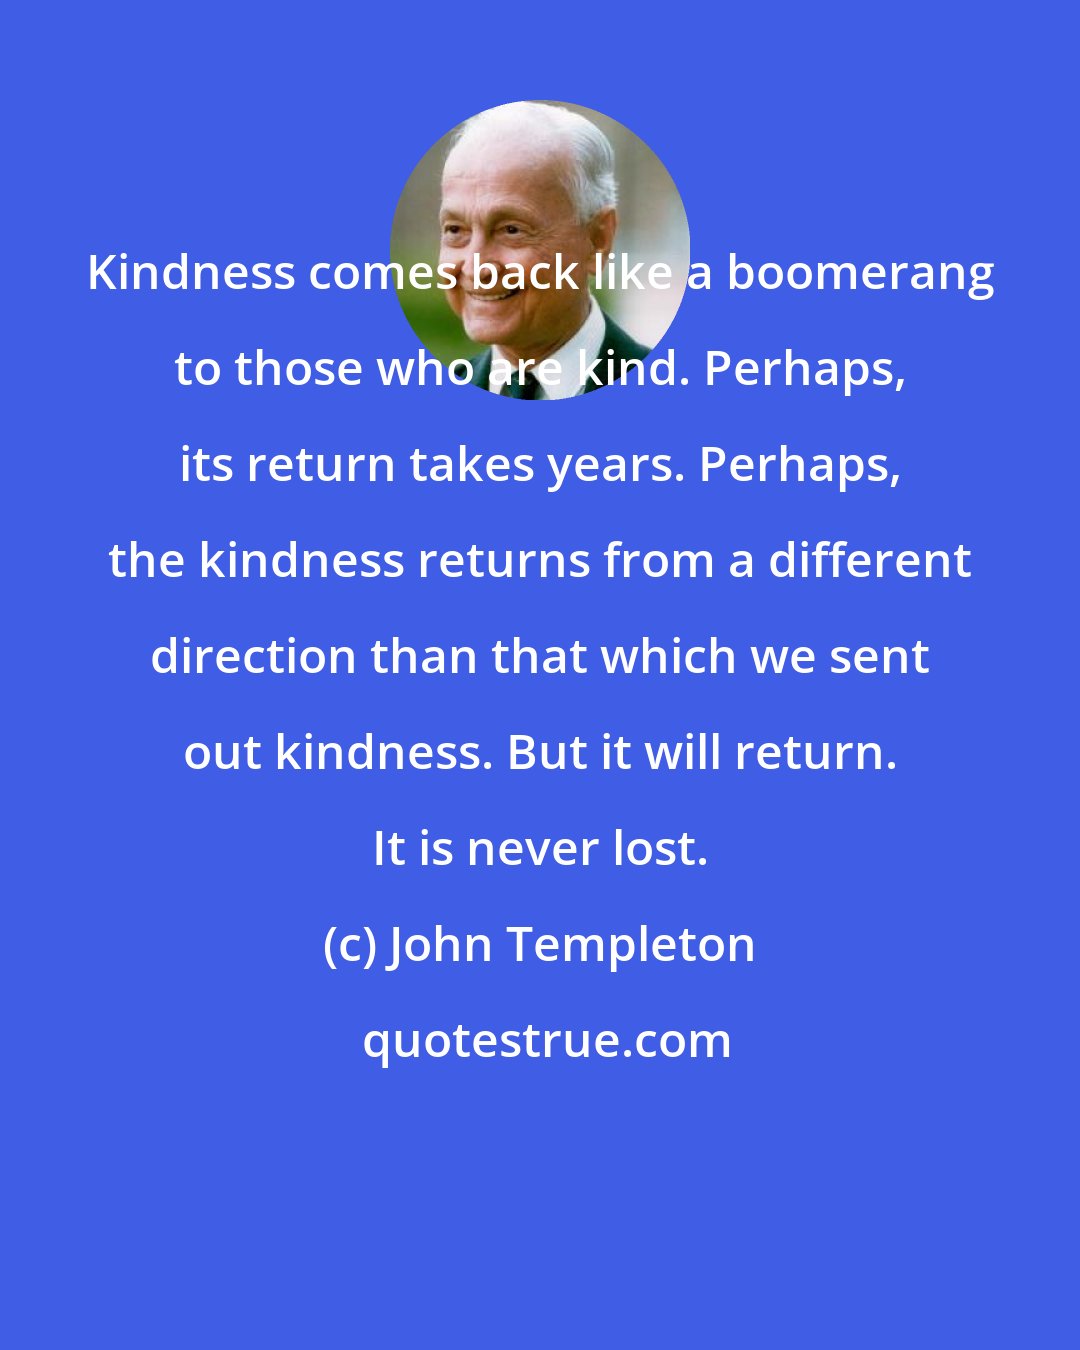 John Templeton: Kindness comes back like a boomerang to those who are kind. Perhaps, its return takes years. Perhaps, the kindness returns from a different direction than that which we sent out kindness. But it will return. It is never lost.